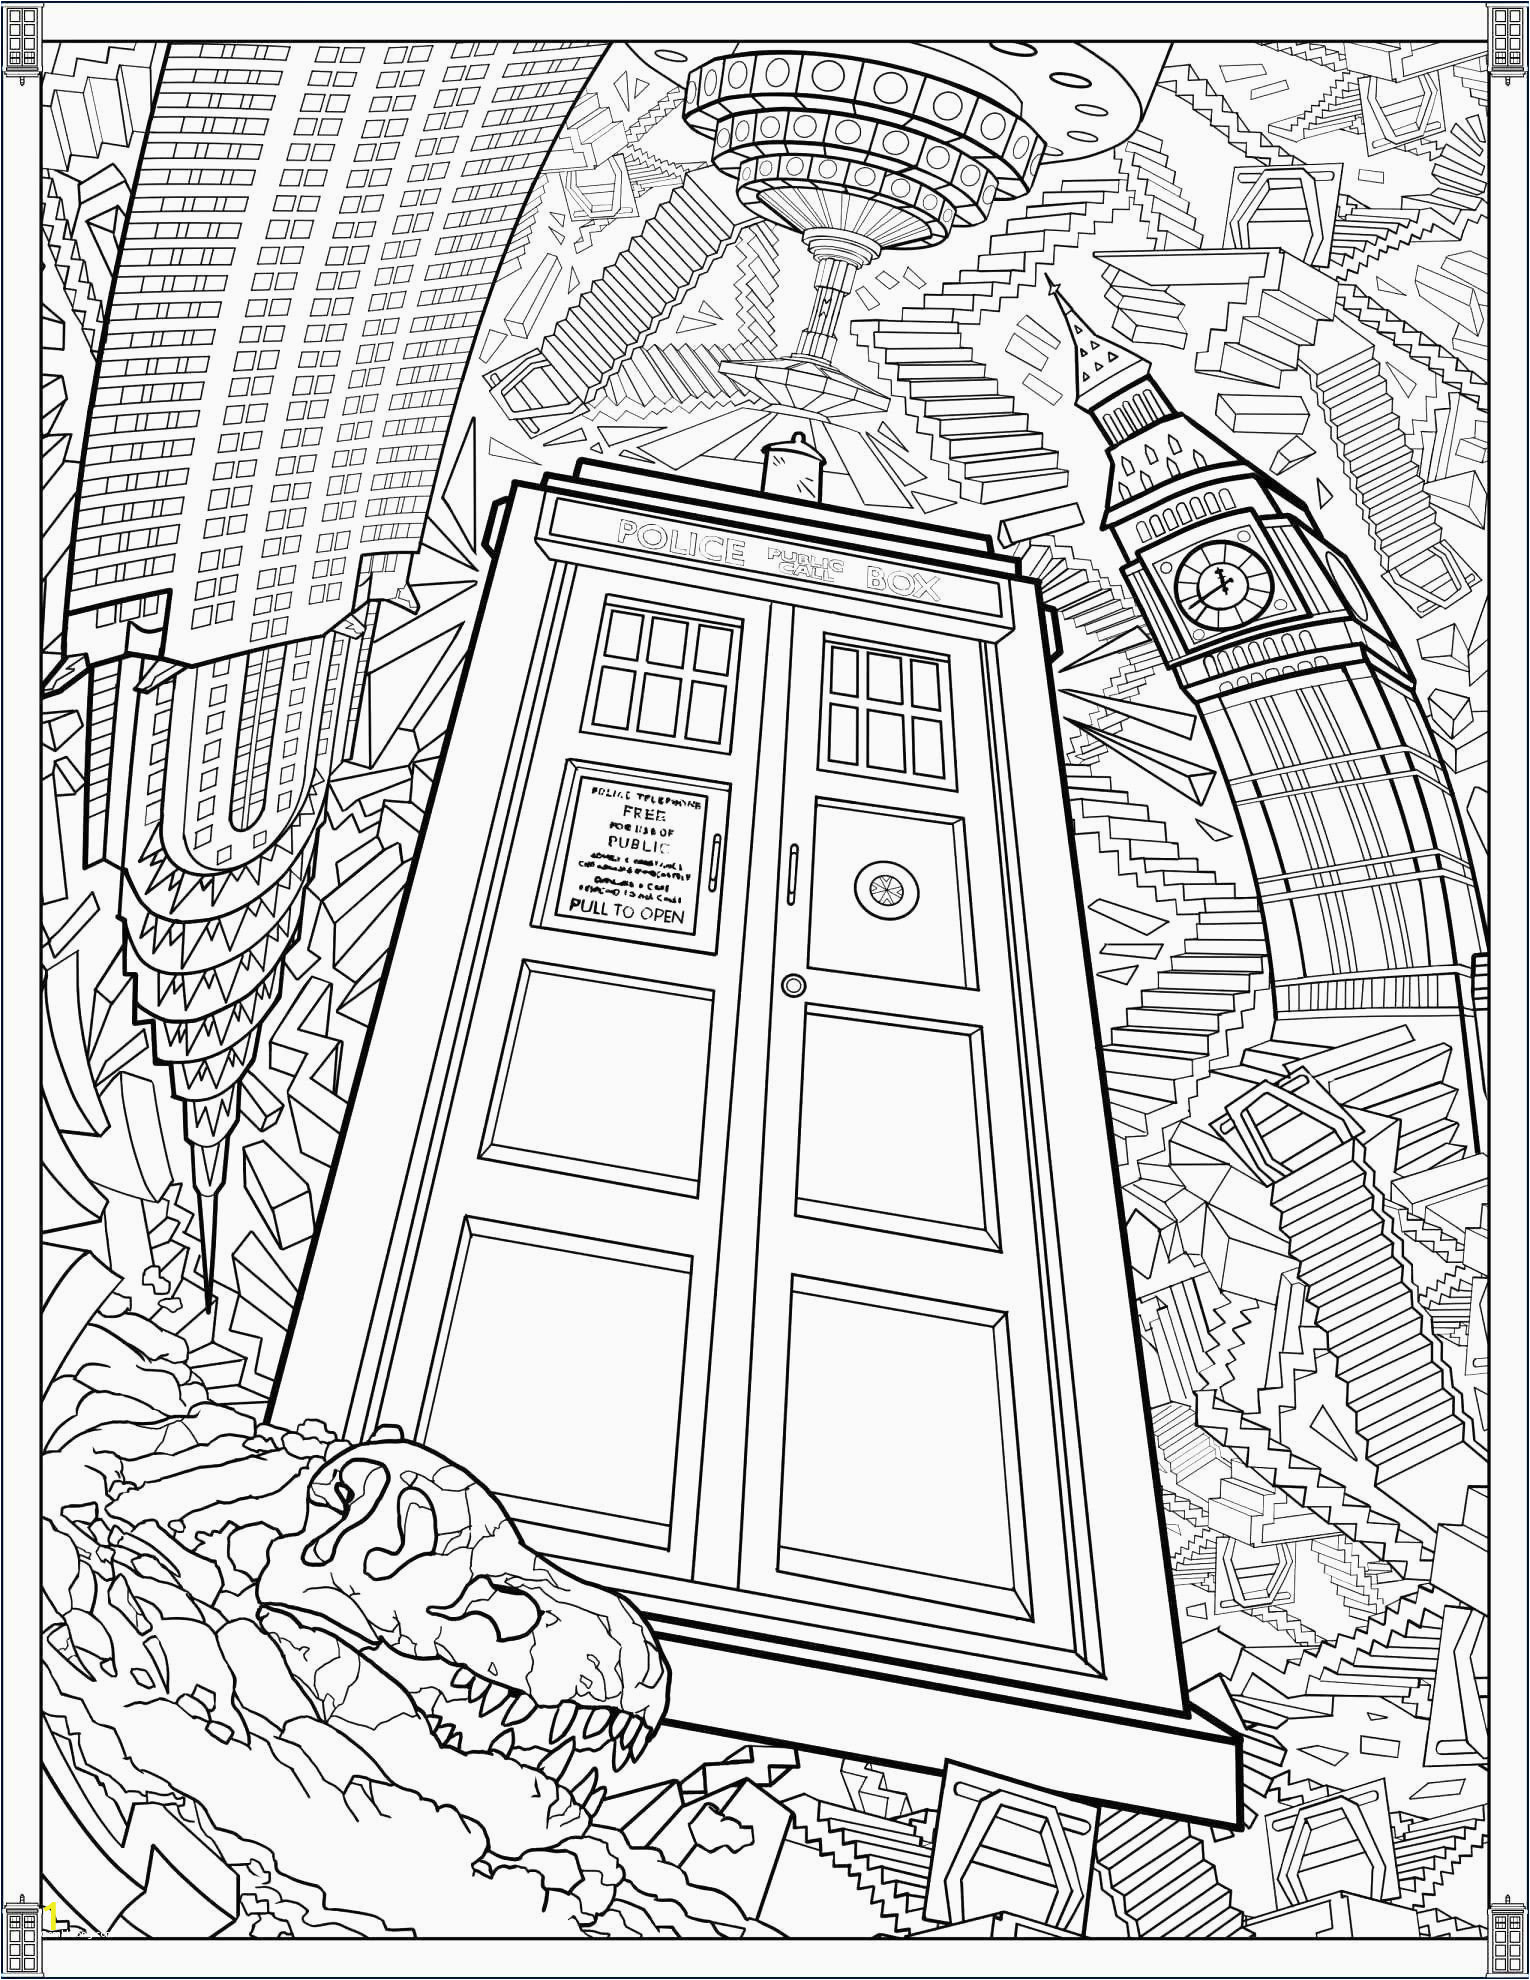 Coloring Pages for Adults Pdf Coloring Pages Free Printable Coloring Books for Adults